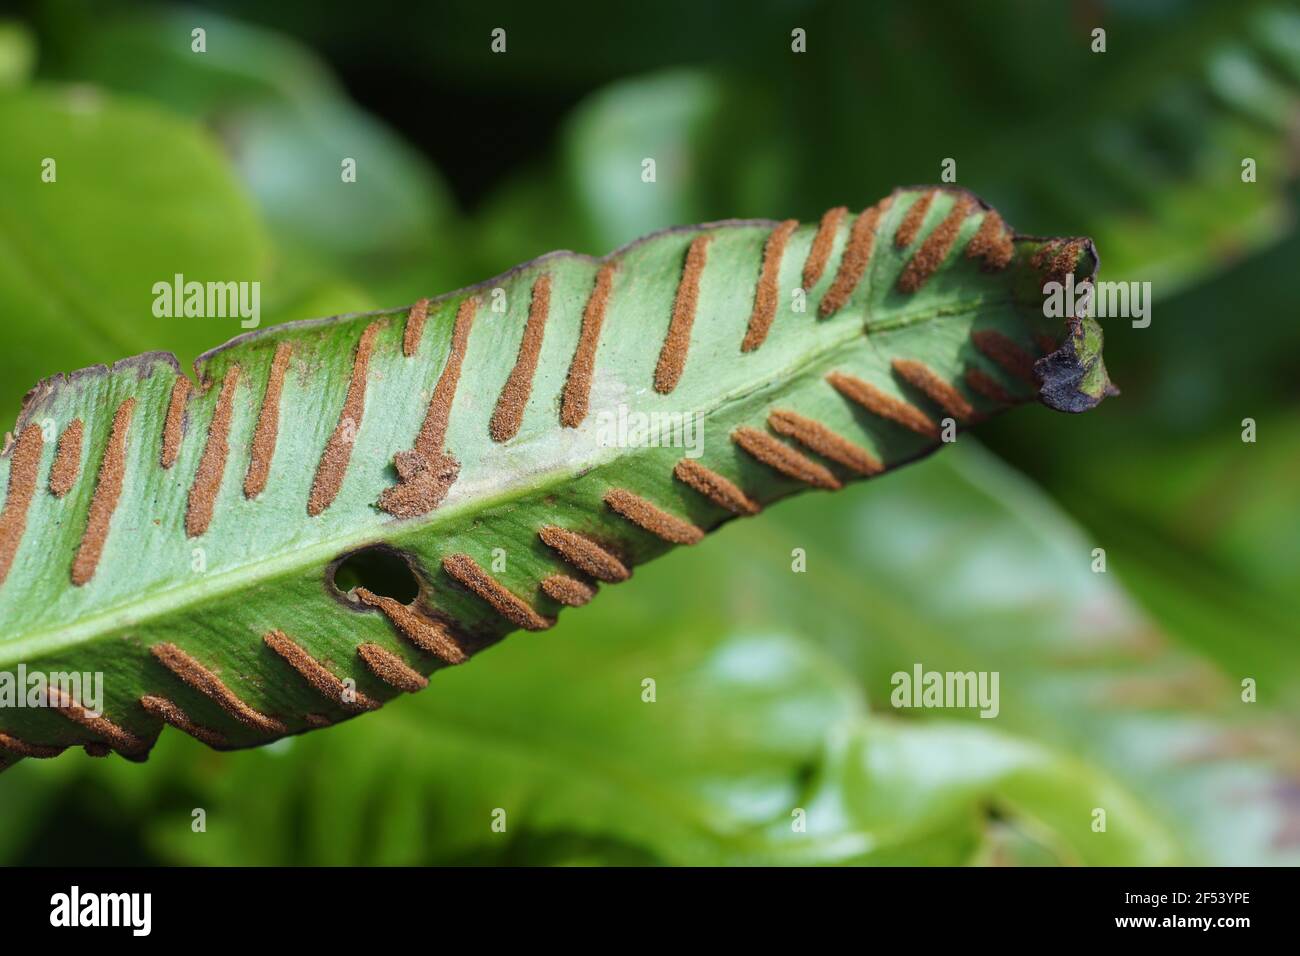 Closeup underside of an old leaf of a hart's-tongue fern (Asplenium scolopendrium) with orange spores. Mine of larva of the moth Psychoides verhuella Stock Photo